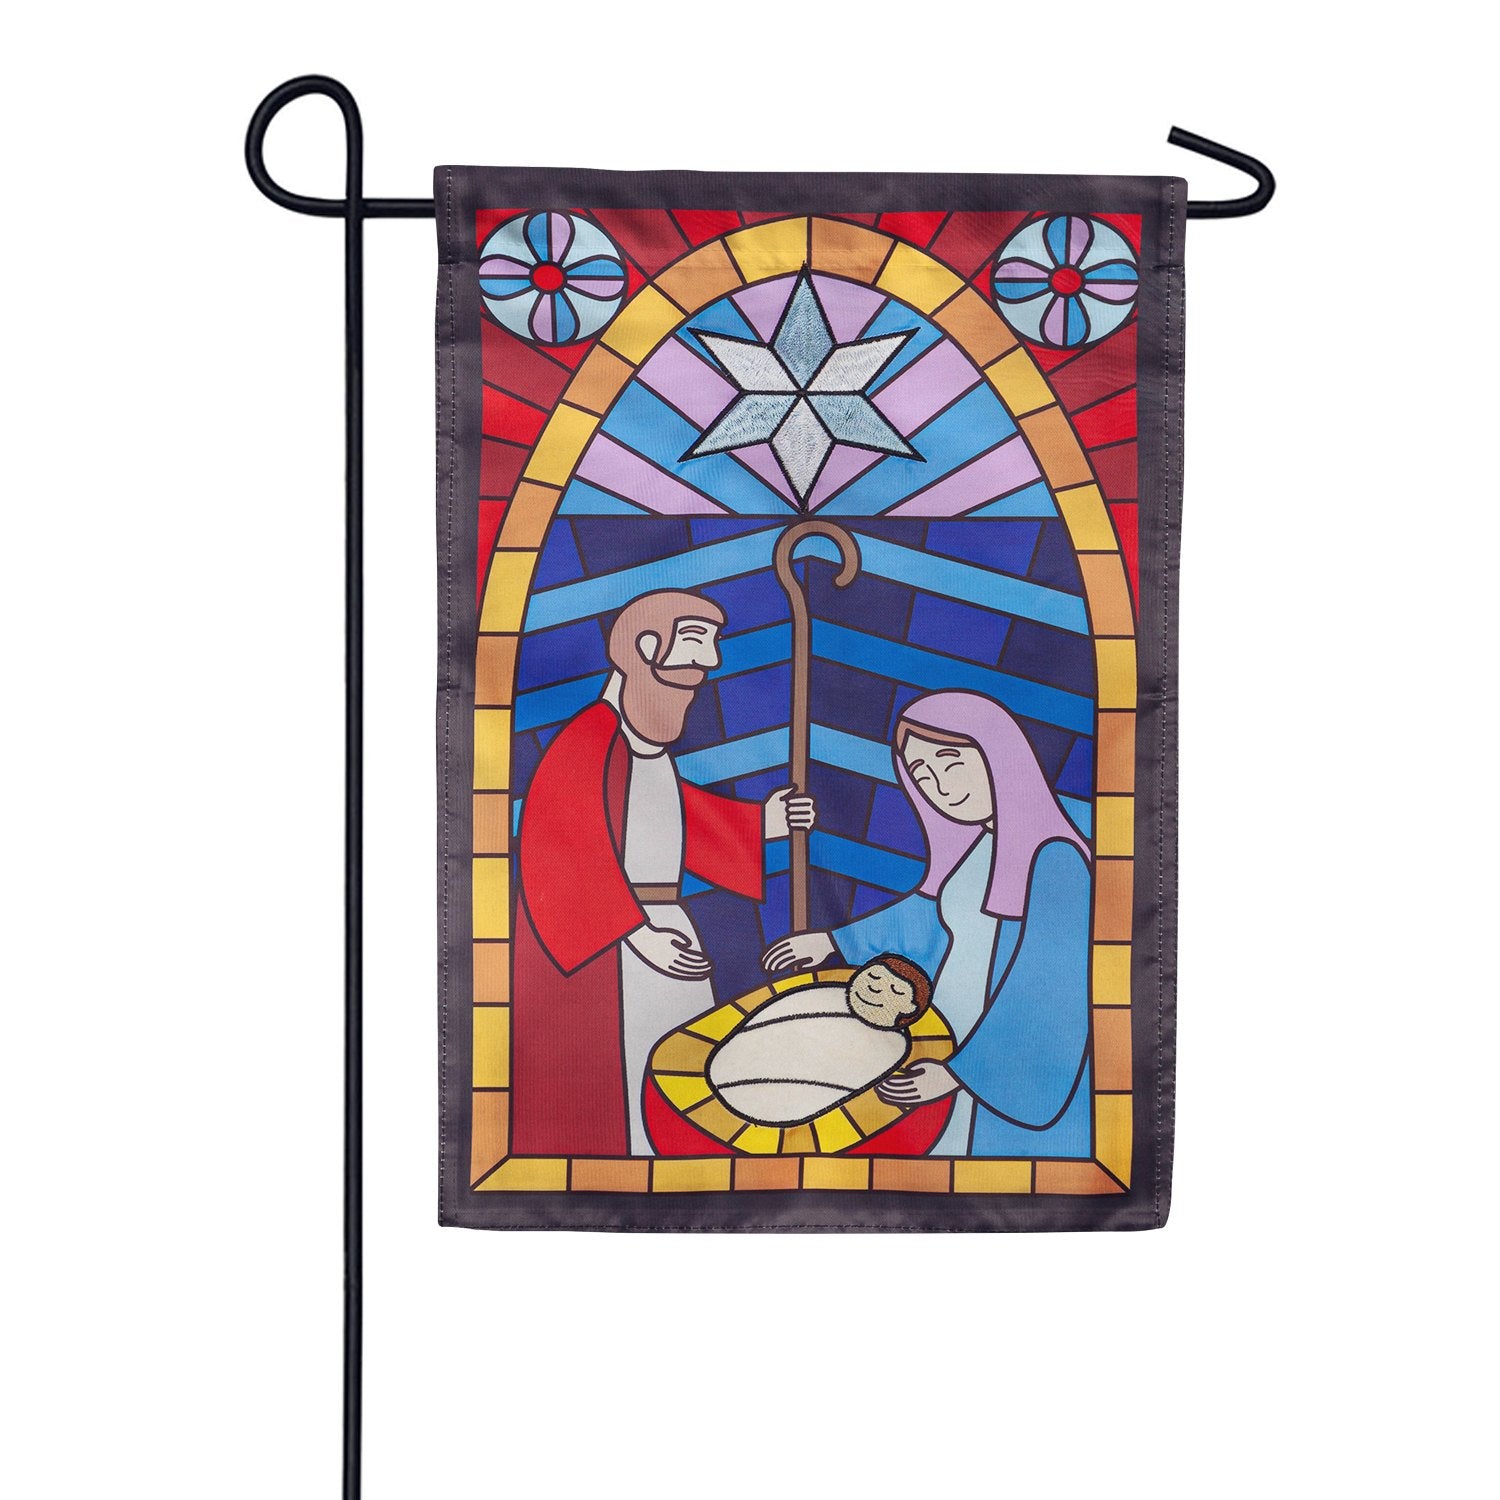 Stained Glass Applique Garden Flag